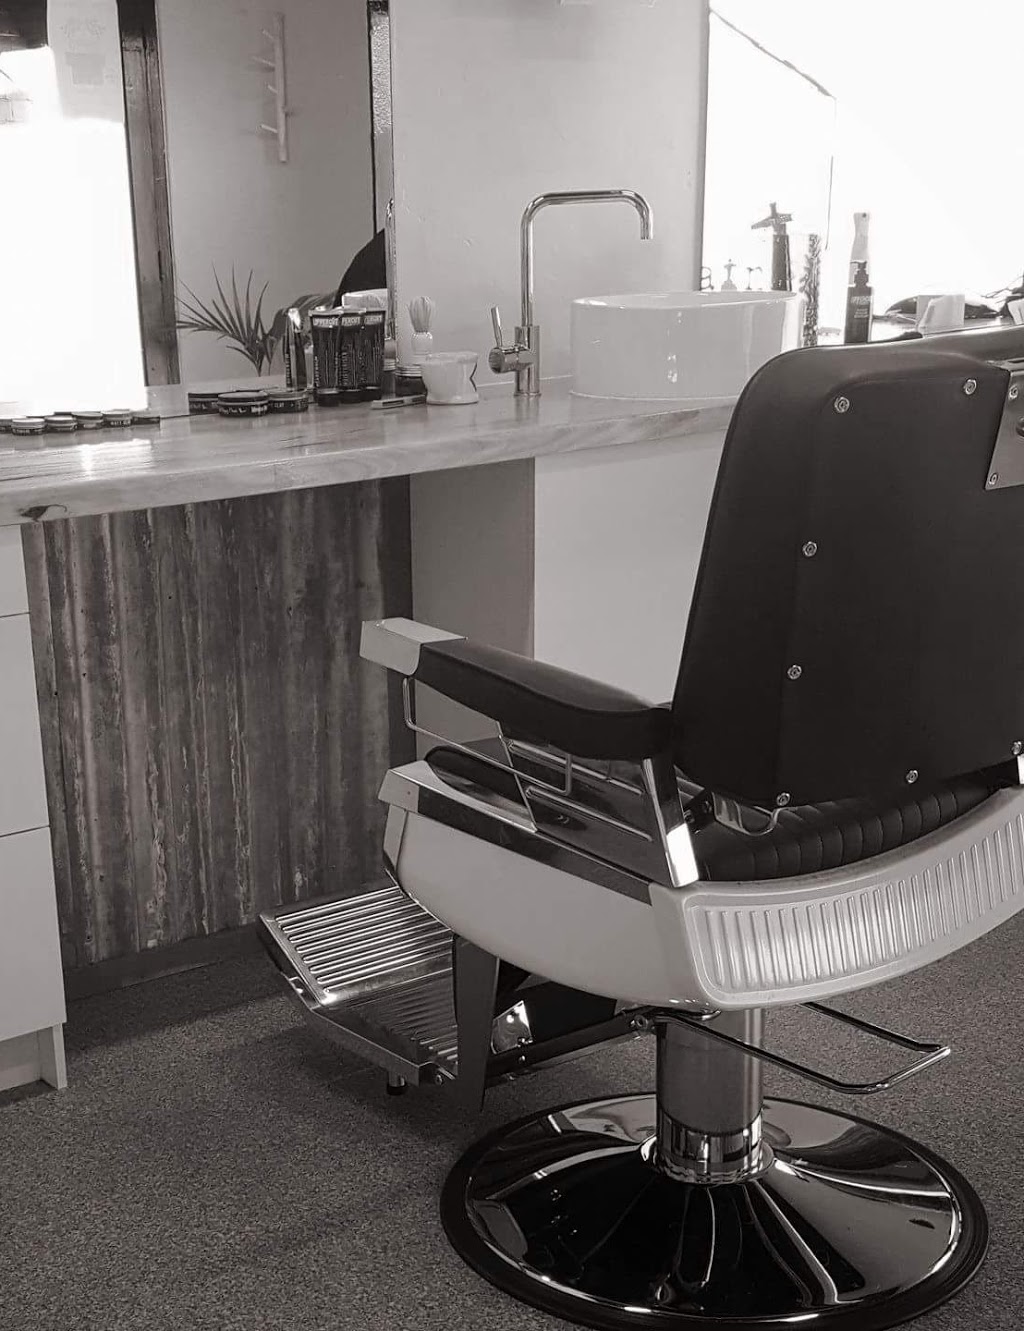 The Maine Barber | 65A Forest St, Castlemaine VIC 3450, Australia